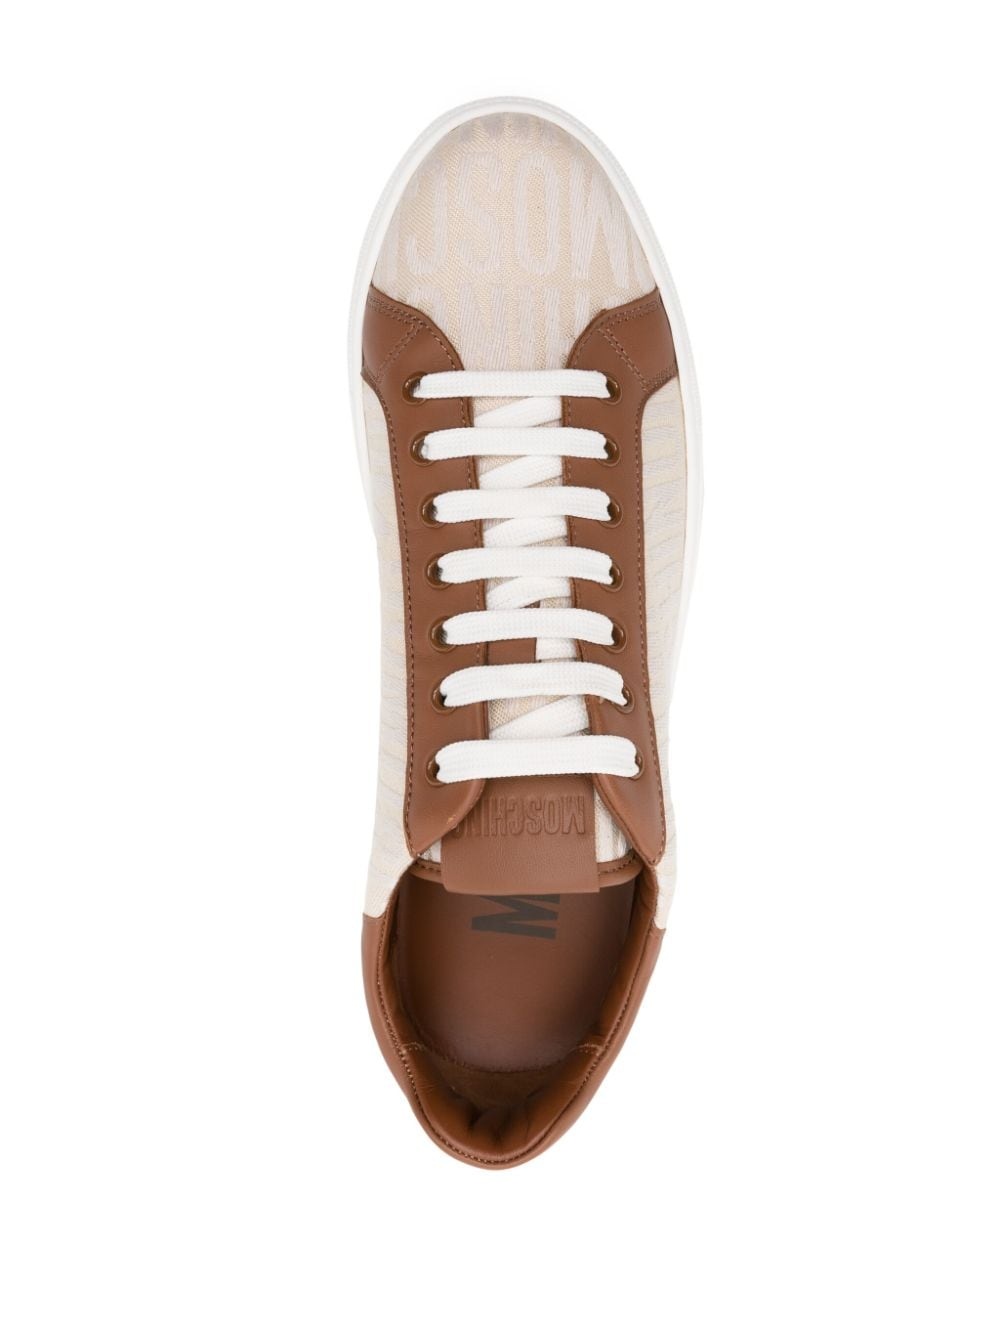 embroidered-logo panelled-leather sneakers - 4